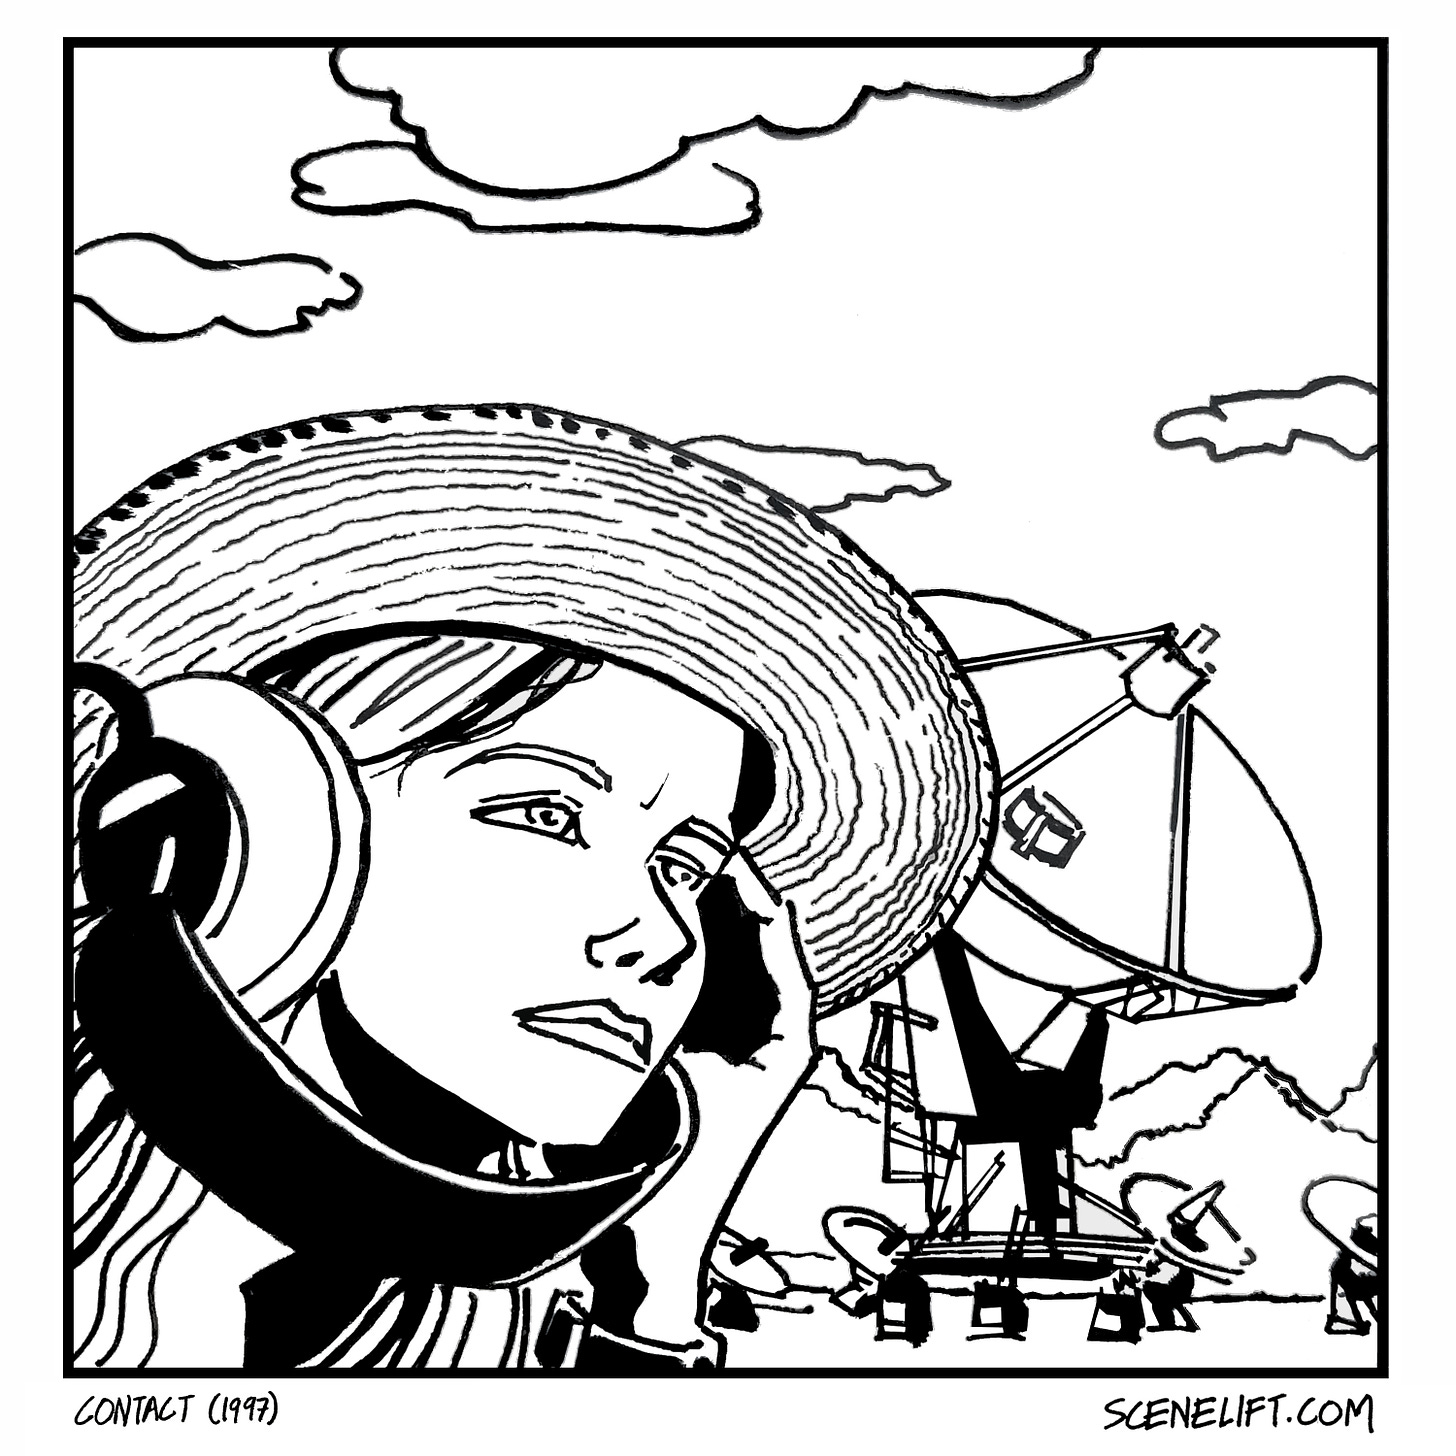 Comic of Ellie at the VLA in New Mexico listening for alien signals in the movie Contact